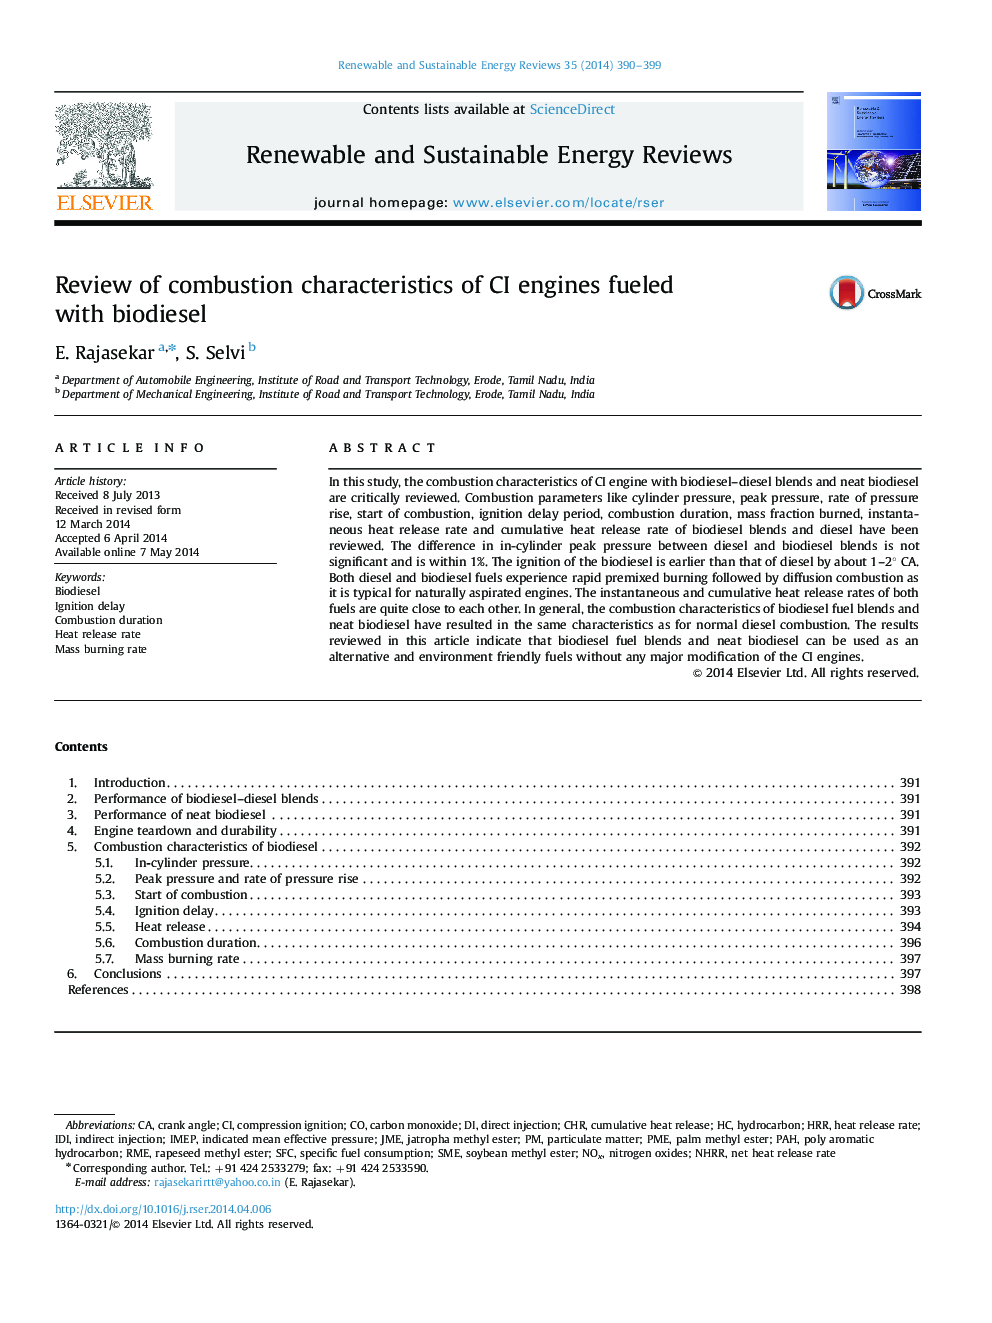 Review of combustion characteristics of CI engines fueled with biodiesel